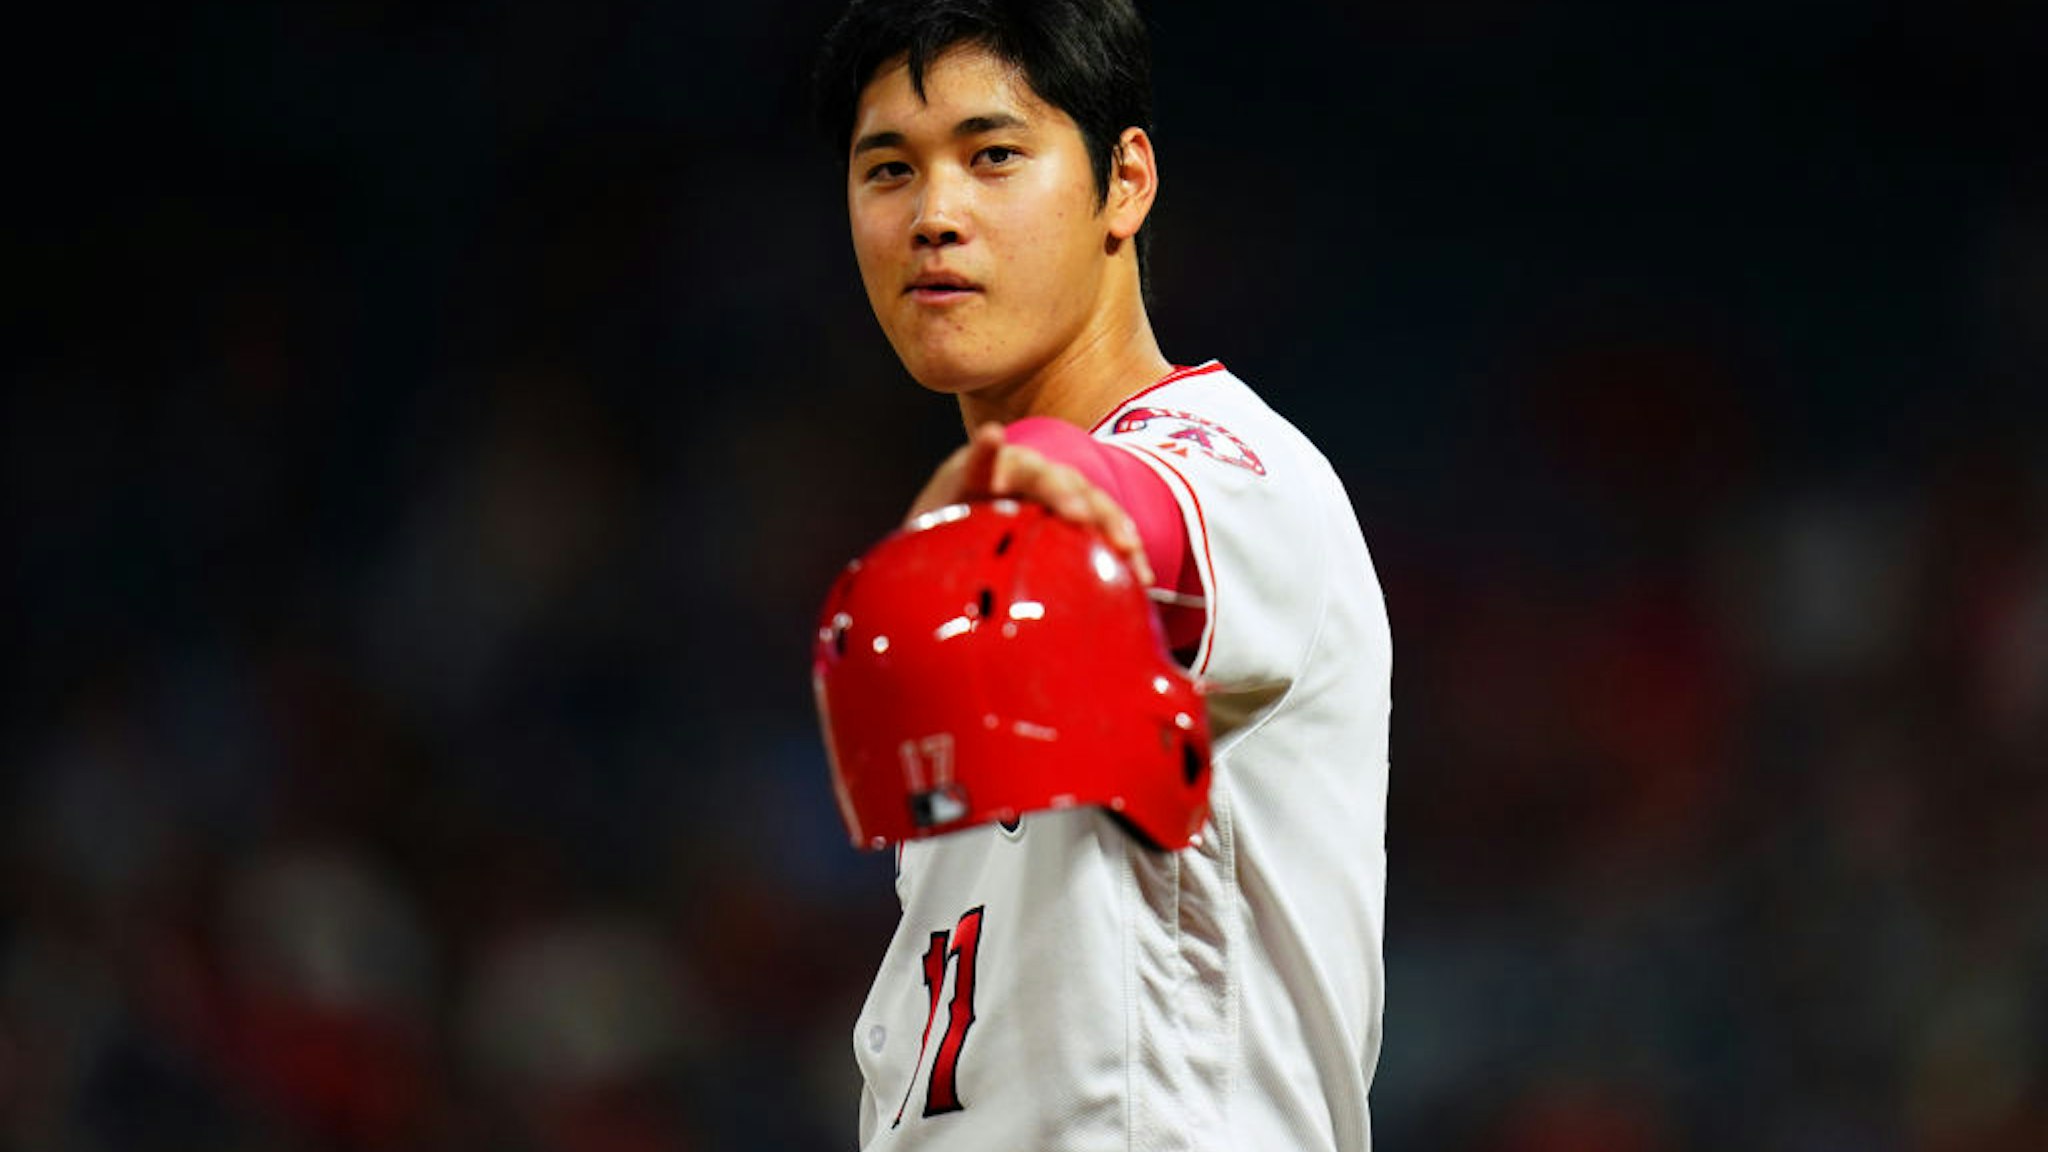 ANAHEIM, CA - SEPTEMBER 25: Shohei Ohtani #17 of the Los Angeles Angels of Anaheim looks on during the game against the Texas Rangers at Angel Stadium on September 25, 2018 in Anaheim, California. (Photo by Masterpress/Getty Images)